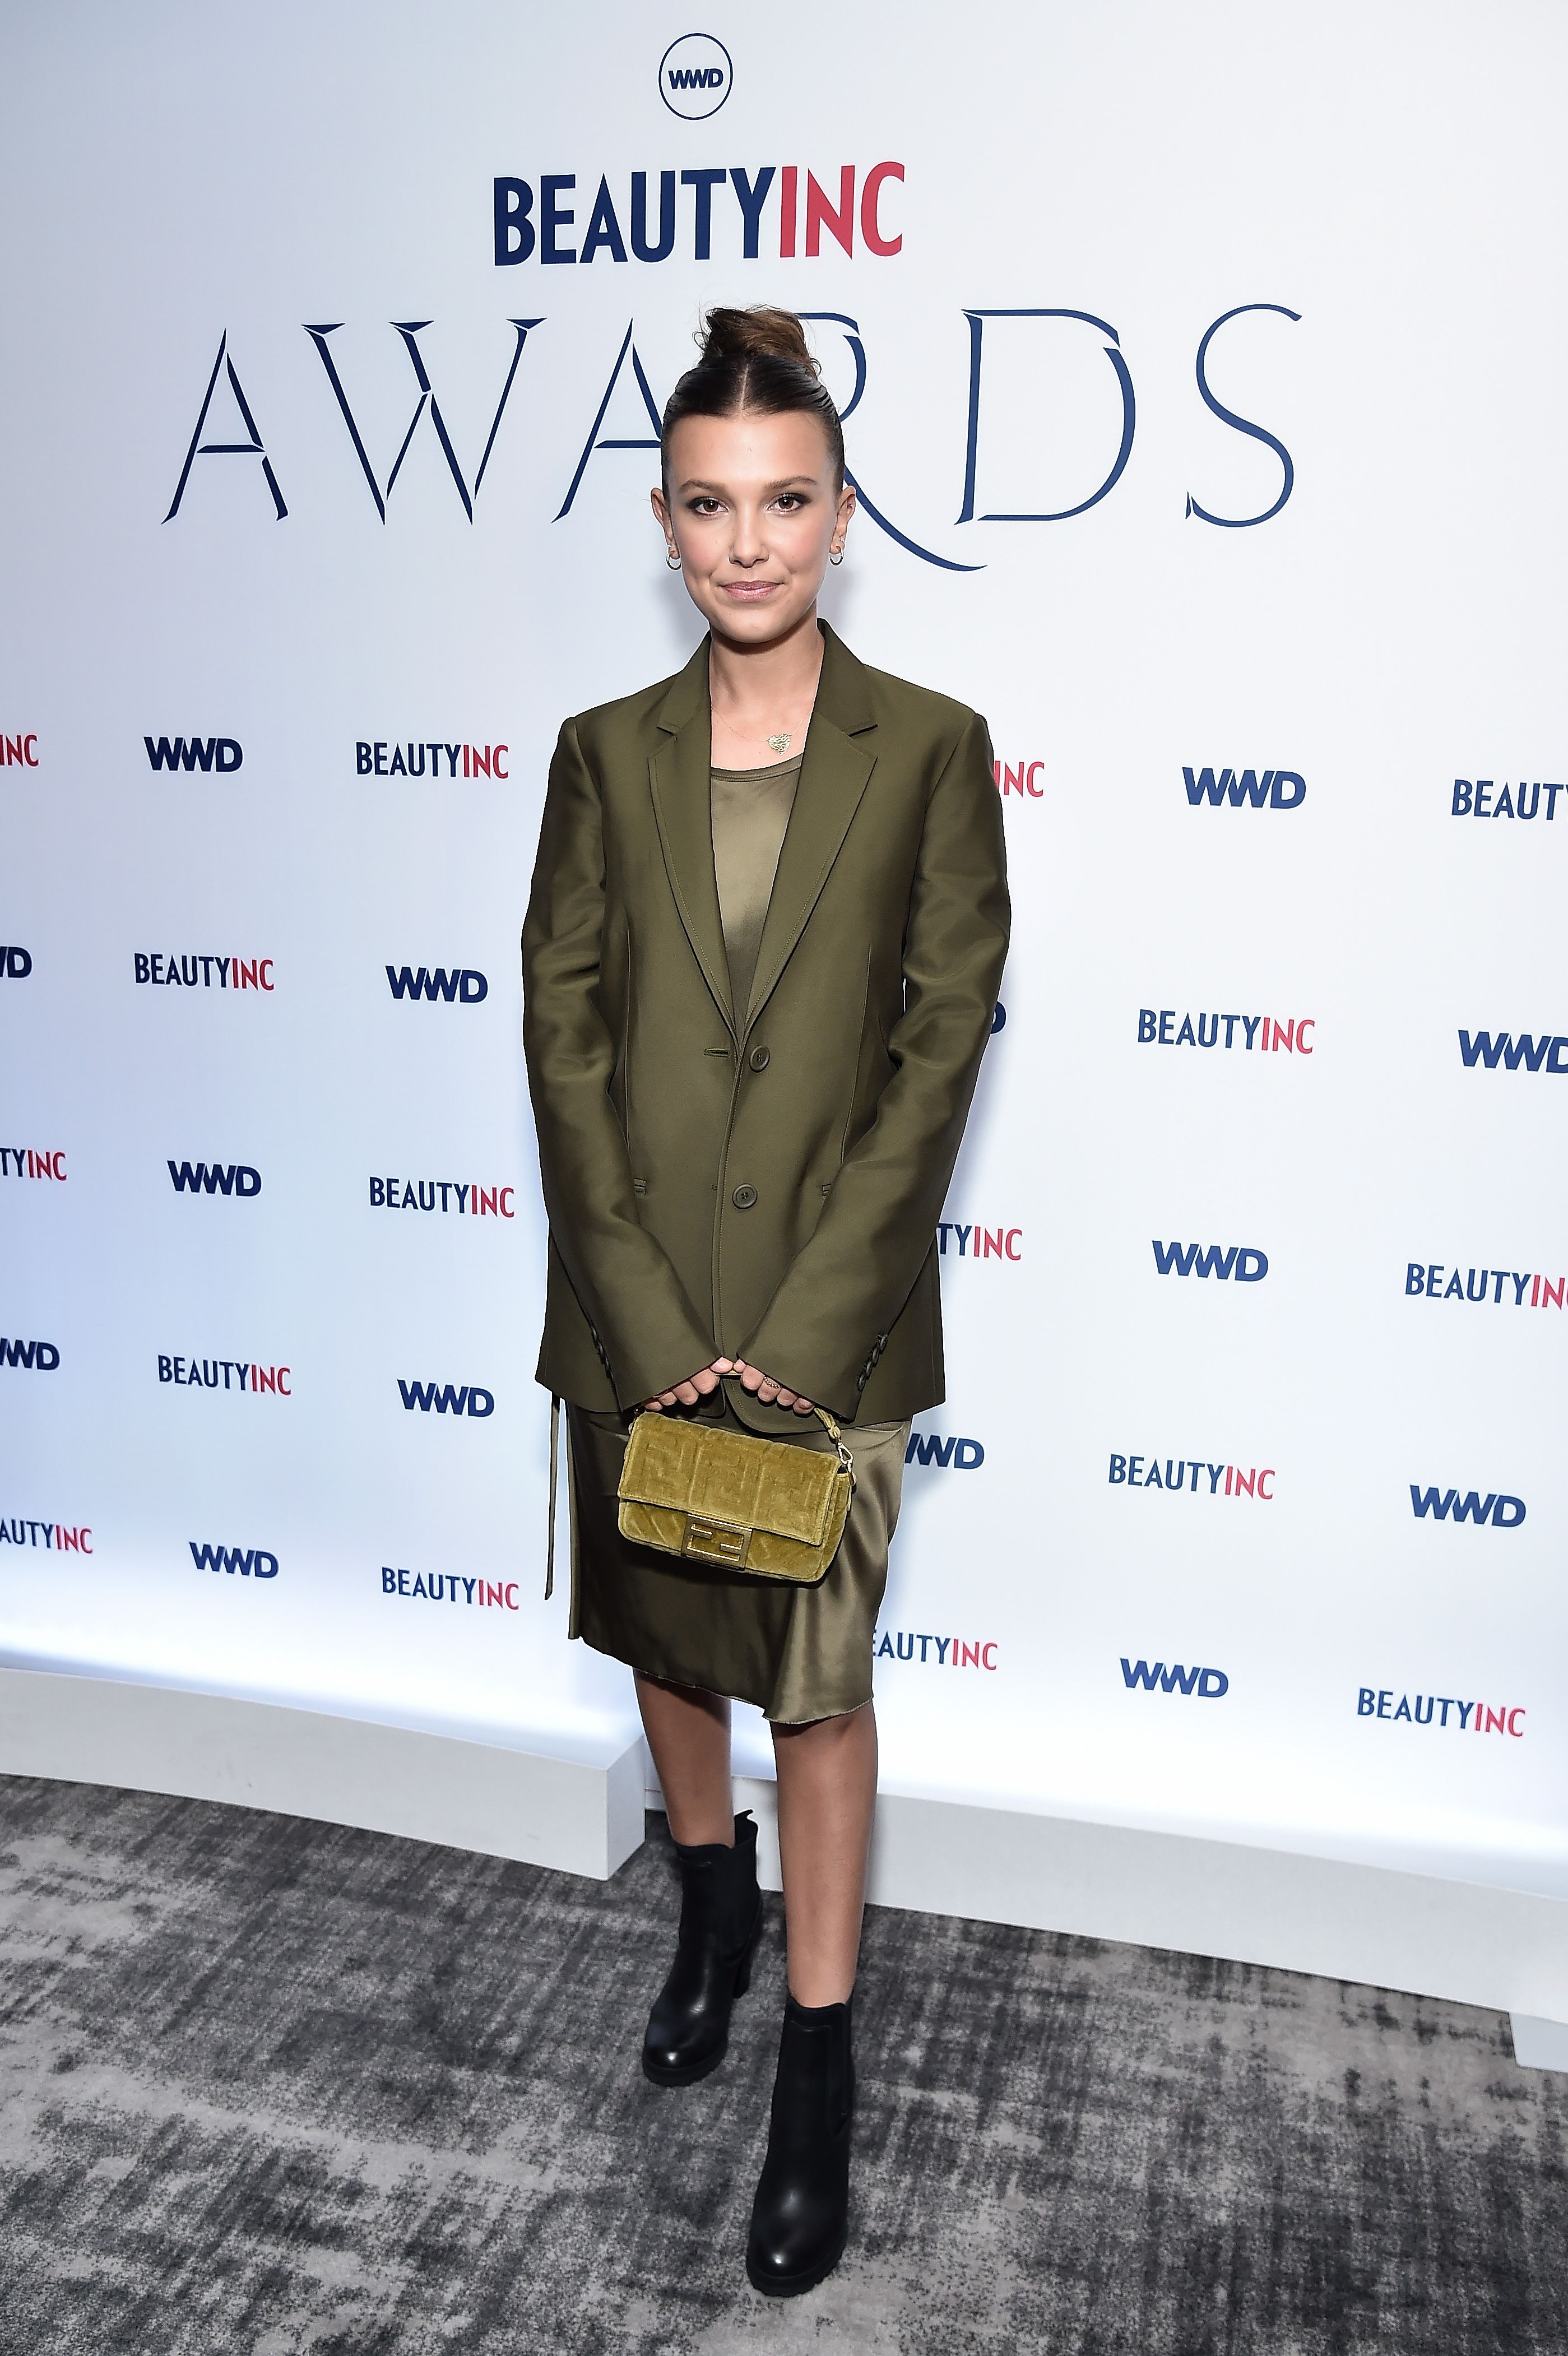 Millie Bobby Brown's Best Red Carpet Style, Photos